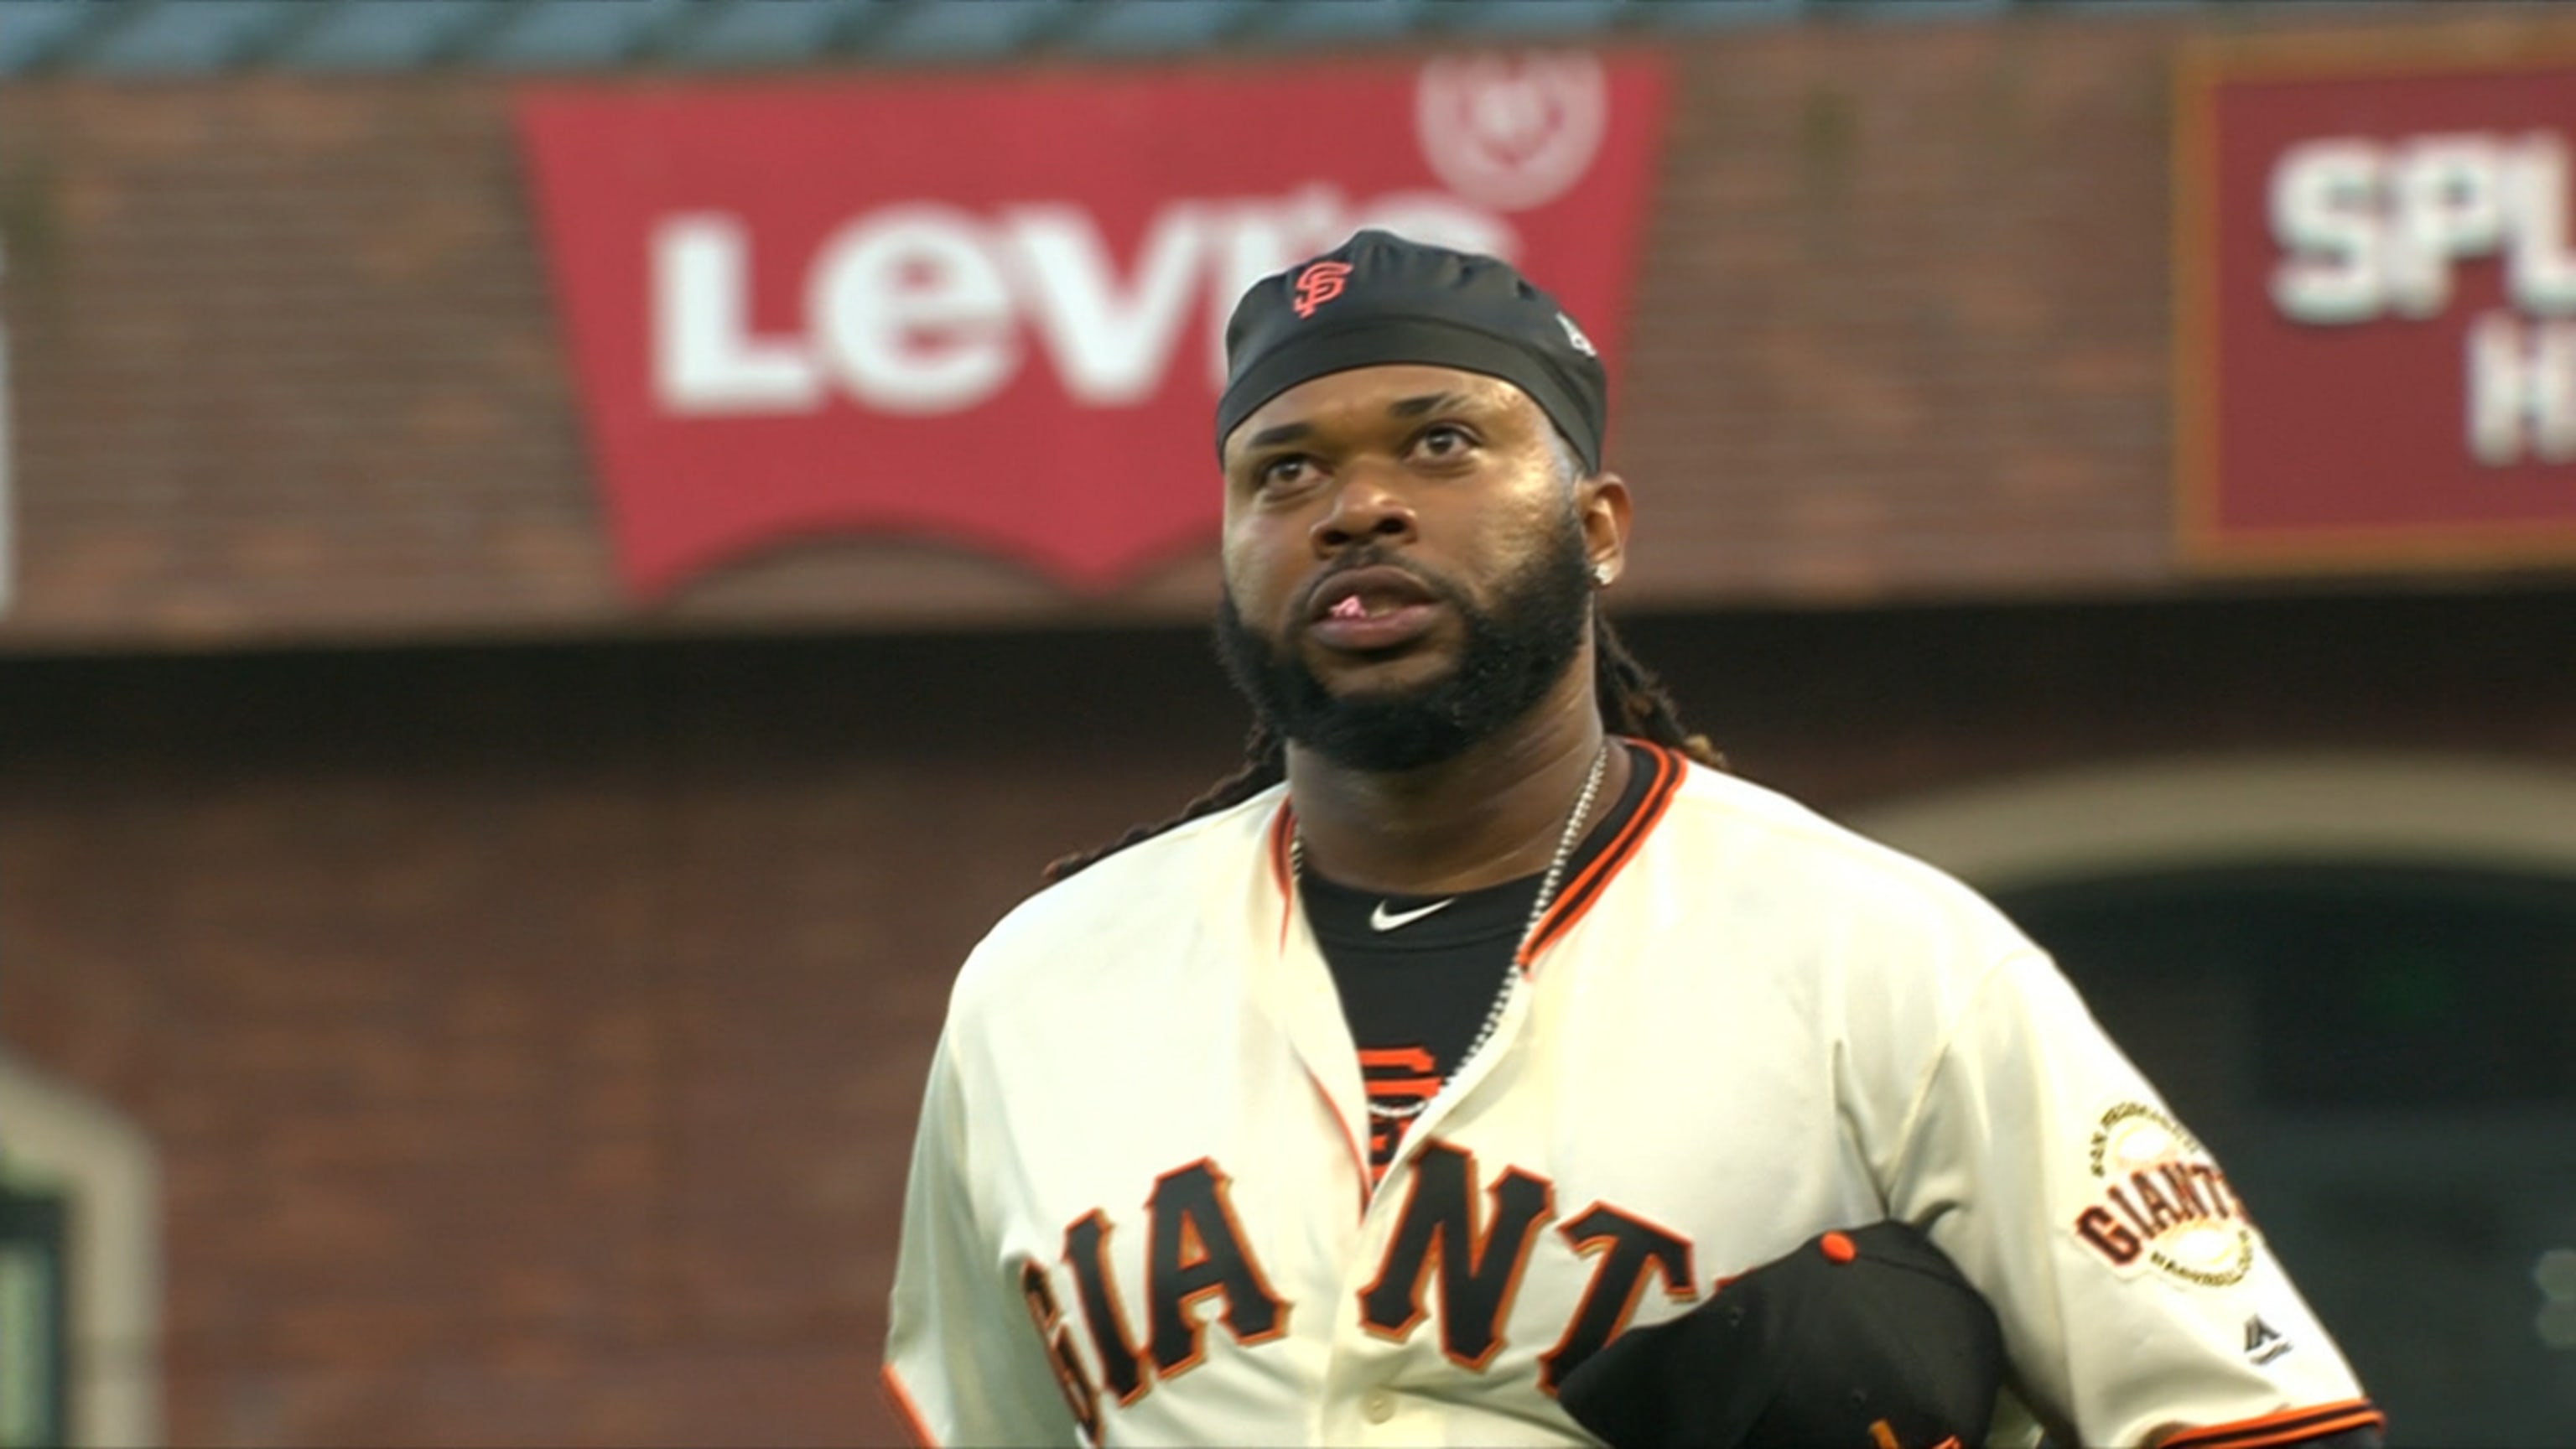 Johnny Cueto strong in return from Tommy John surgery